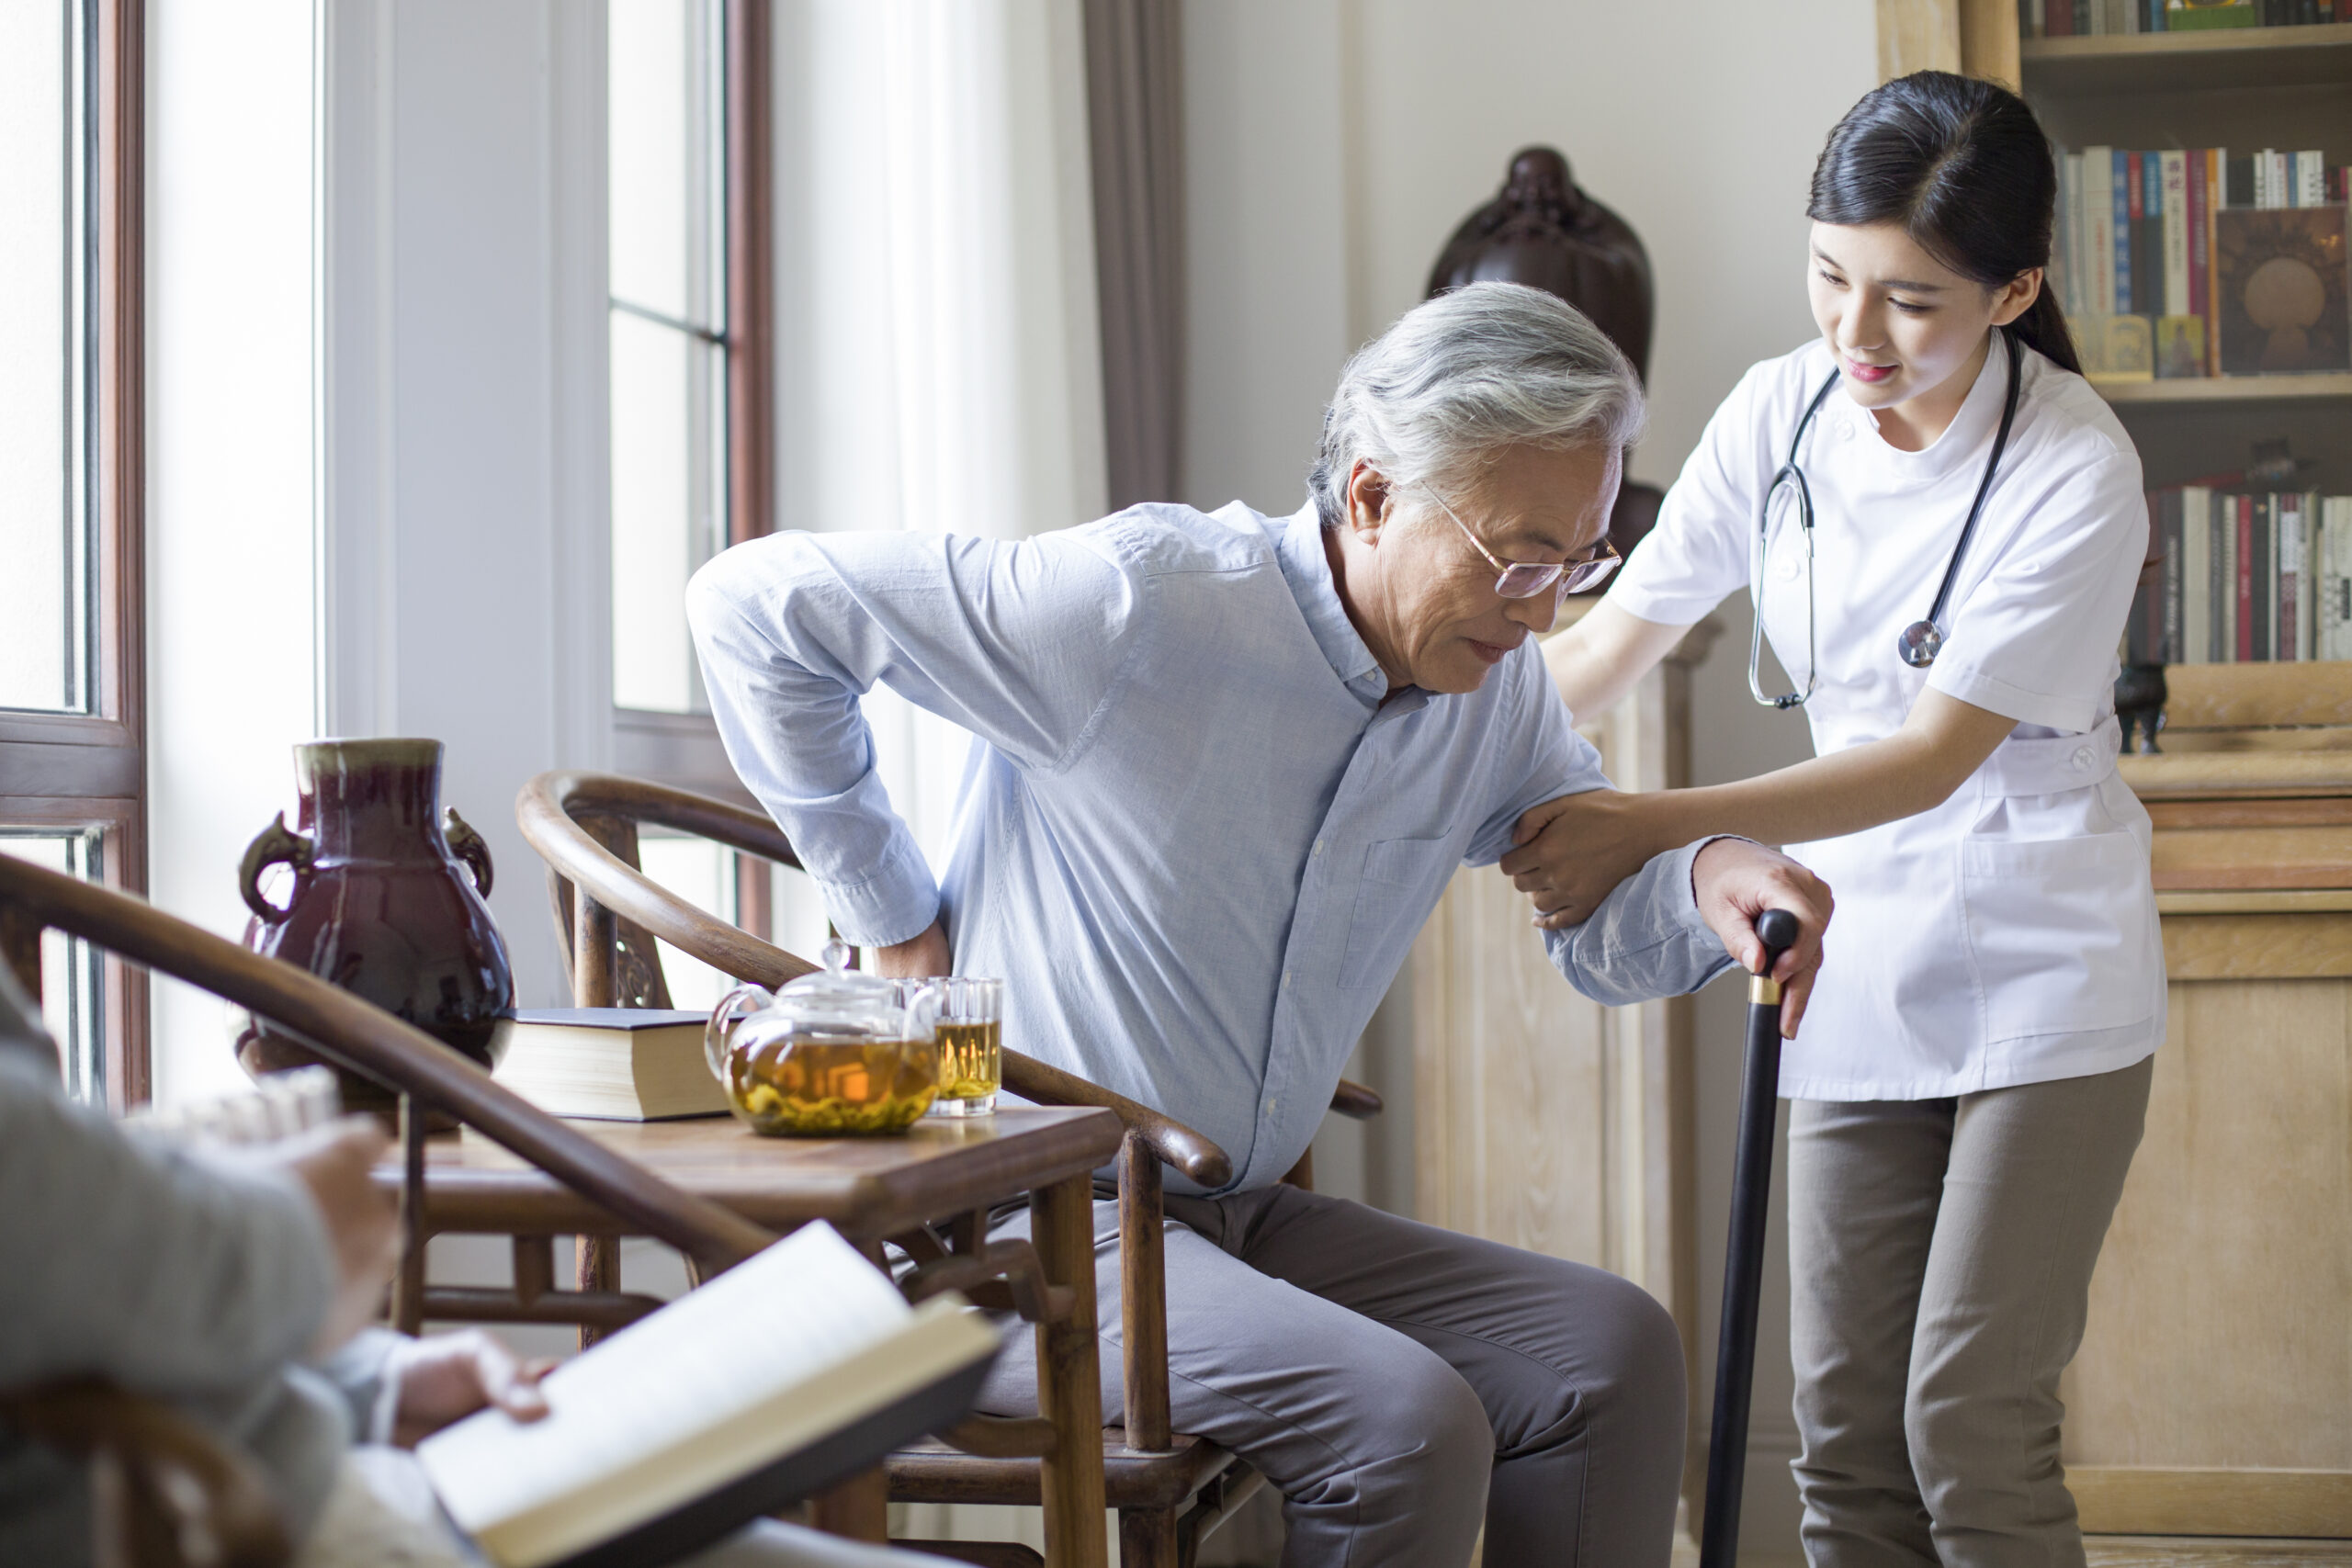 Nursing Home Care! Does Medicare or Medicaid Cover?